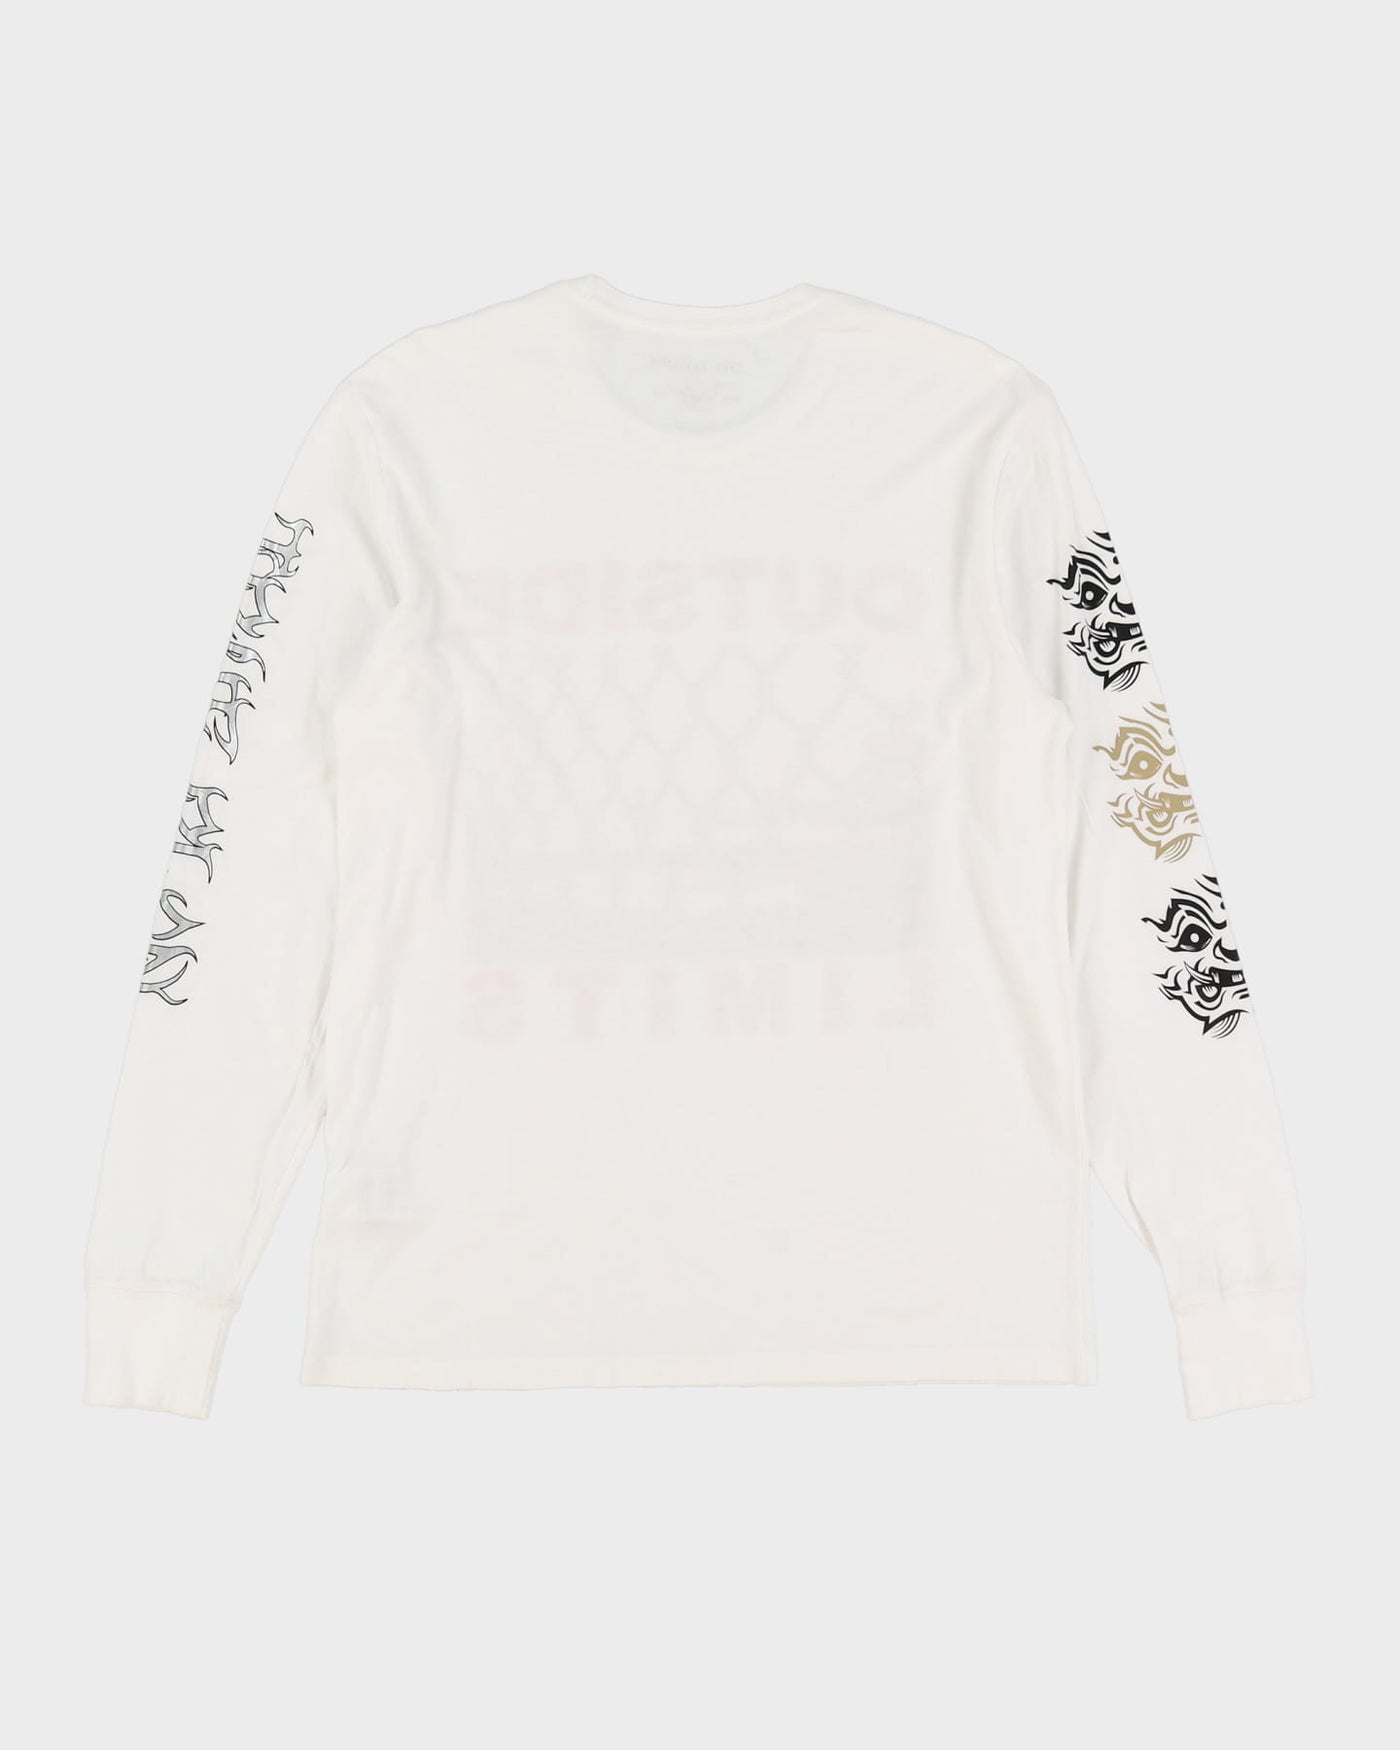 True Religion White Long Sleeve Double Sided Graphic T-Shirt - M